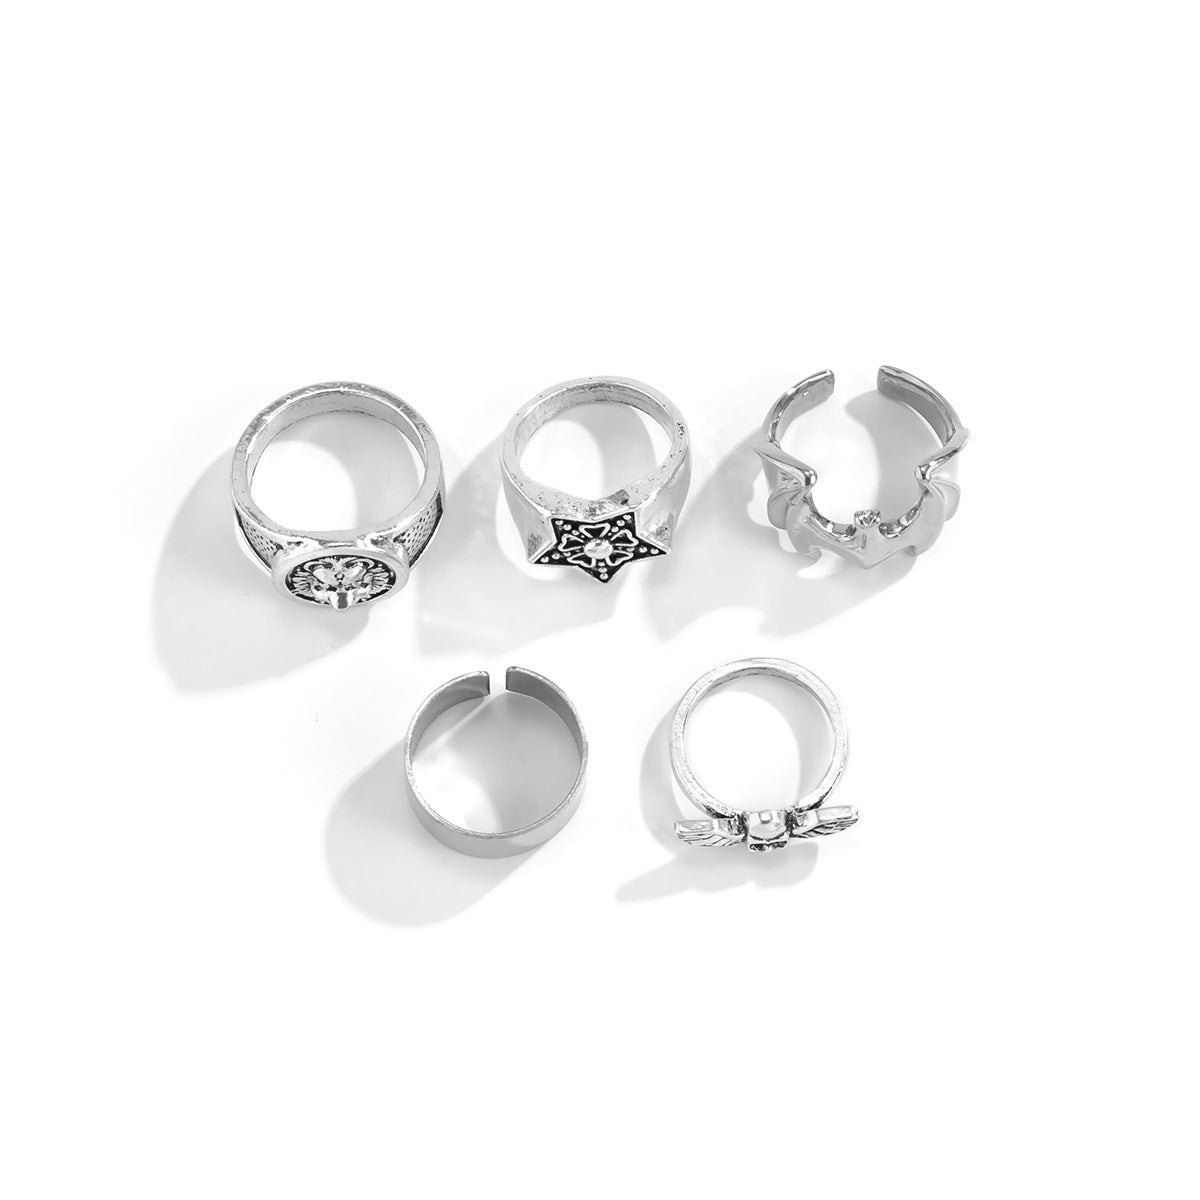 Cartoon Style Star Wings Skull Alloy Rings 5 Pieces